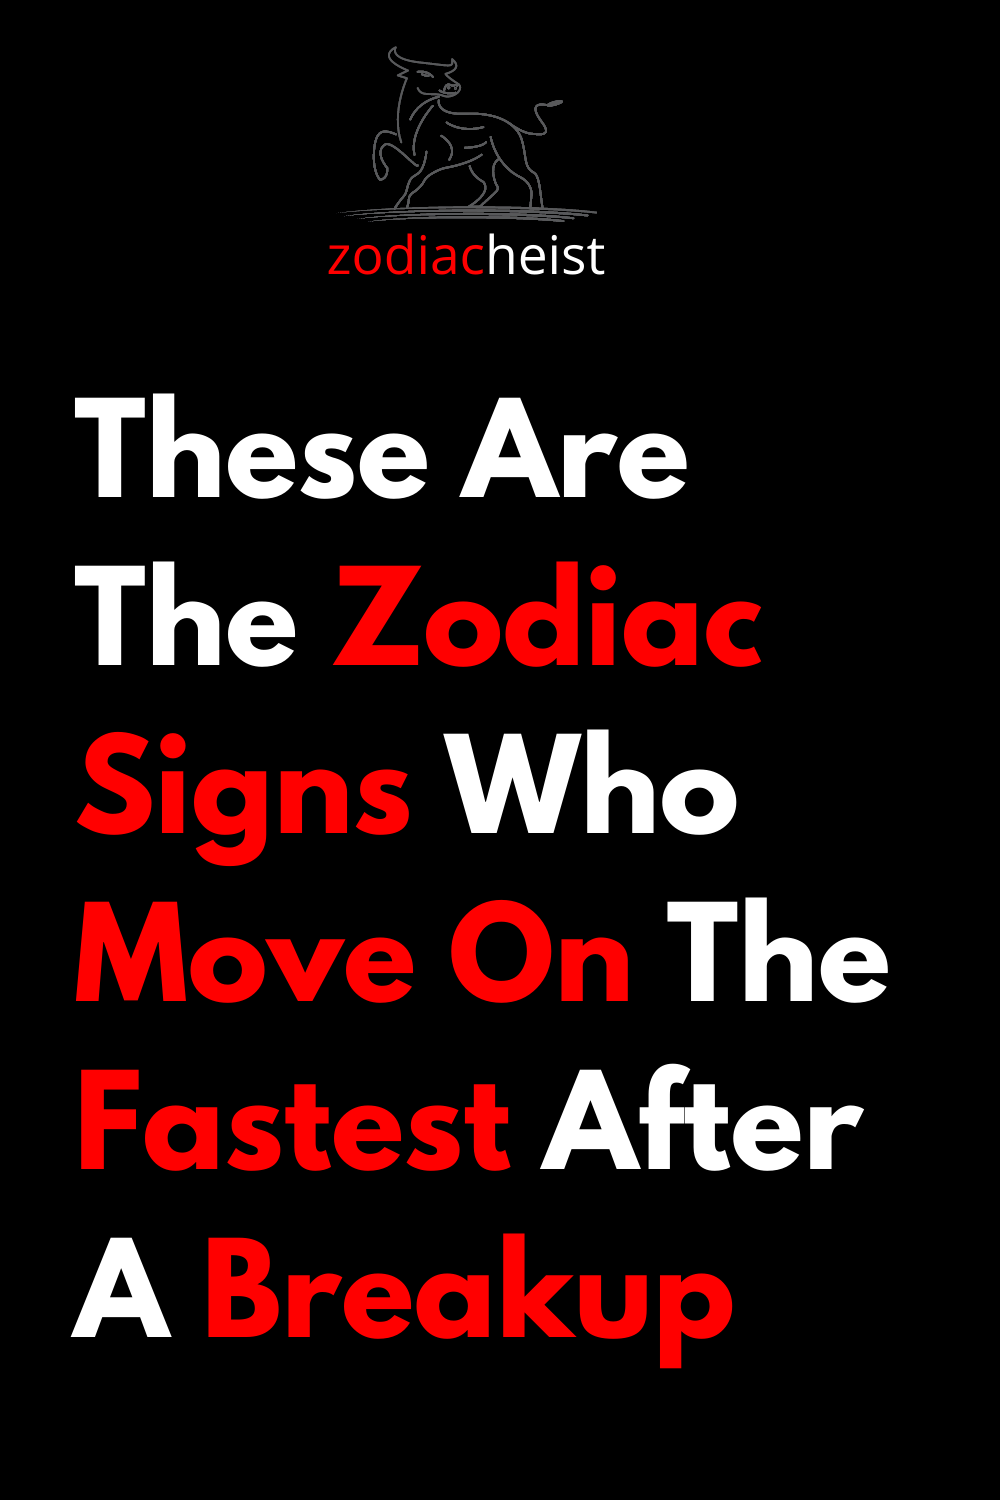 These Are The Zodiac Signs Who Move On The Fastest After A Breakup